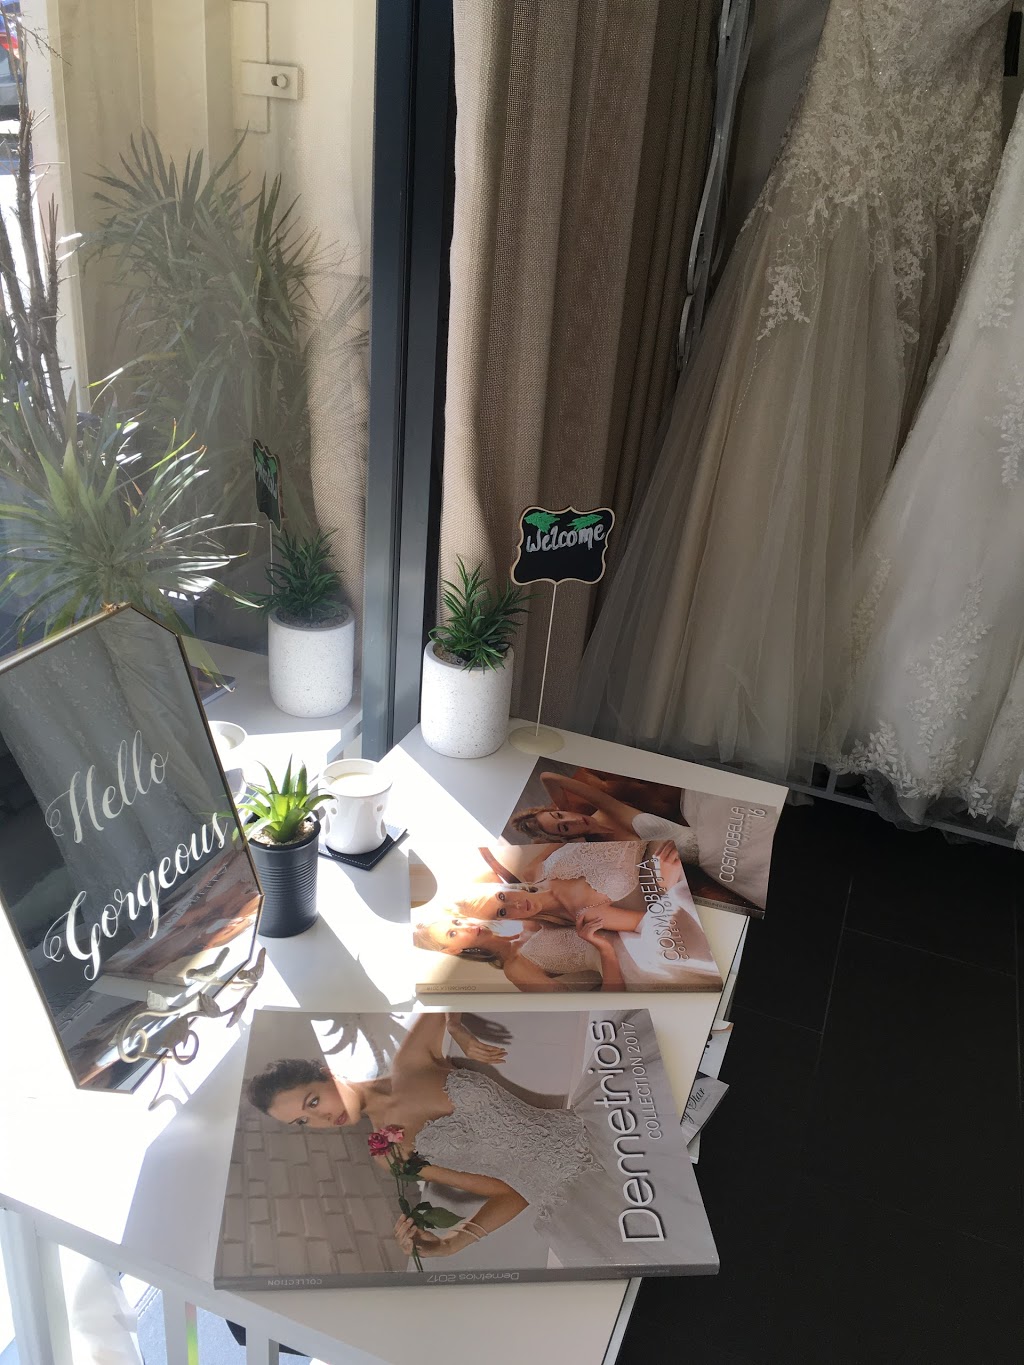 Final Touch Bridal | clothing store | 11/54 Gindurra Rd, Somersby NSW 2250, Australia | 0416430414 OR +61 416 430 414